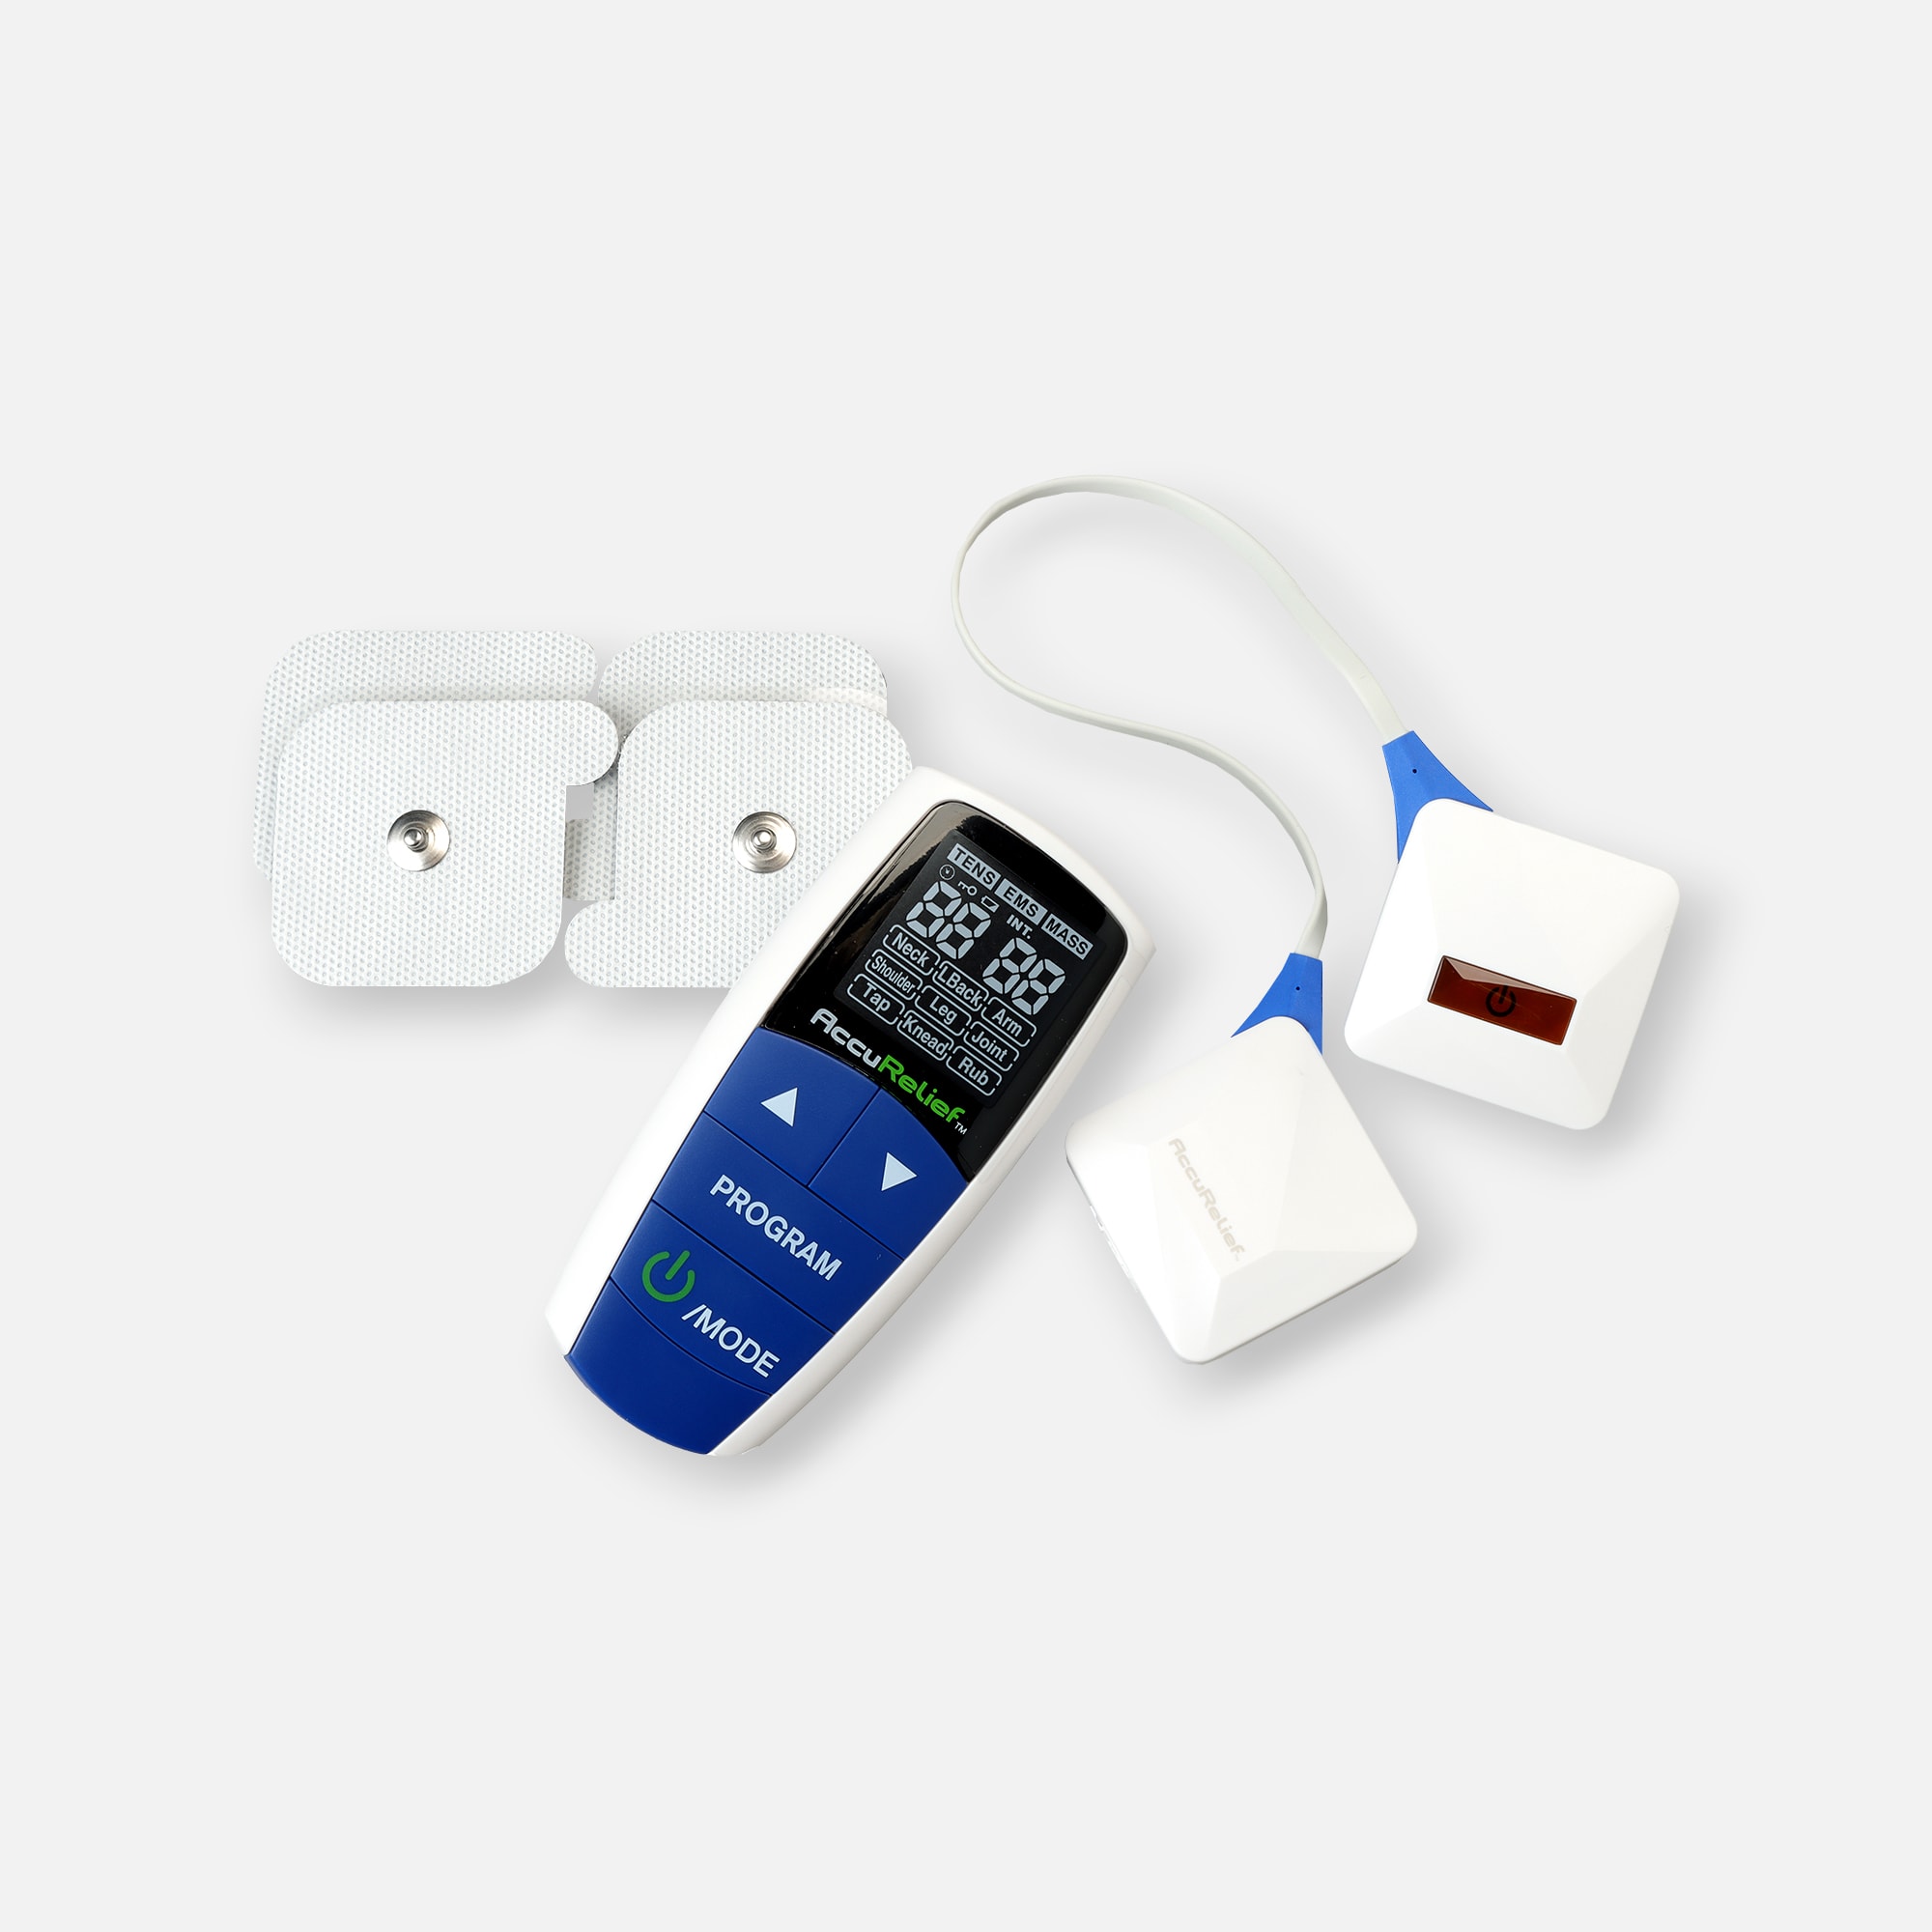 https://hsastore.com/on/demandware.static/-/Sites-hec-master/default/dw79d110cc/images/large/accurelief-wireless-3-in-1-pain-relief-device-25871-6.jpg